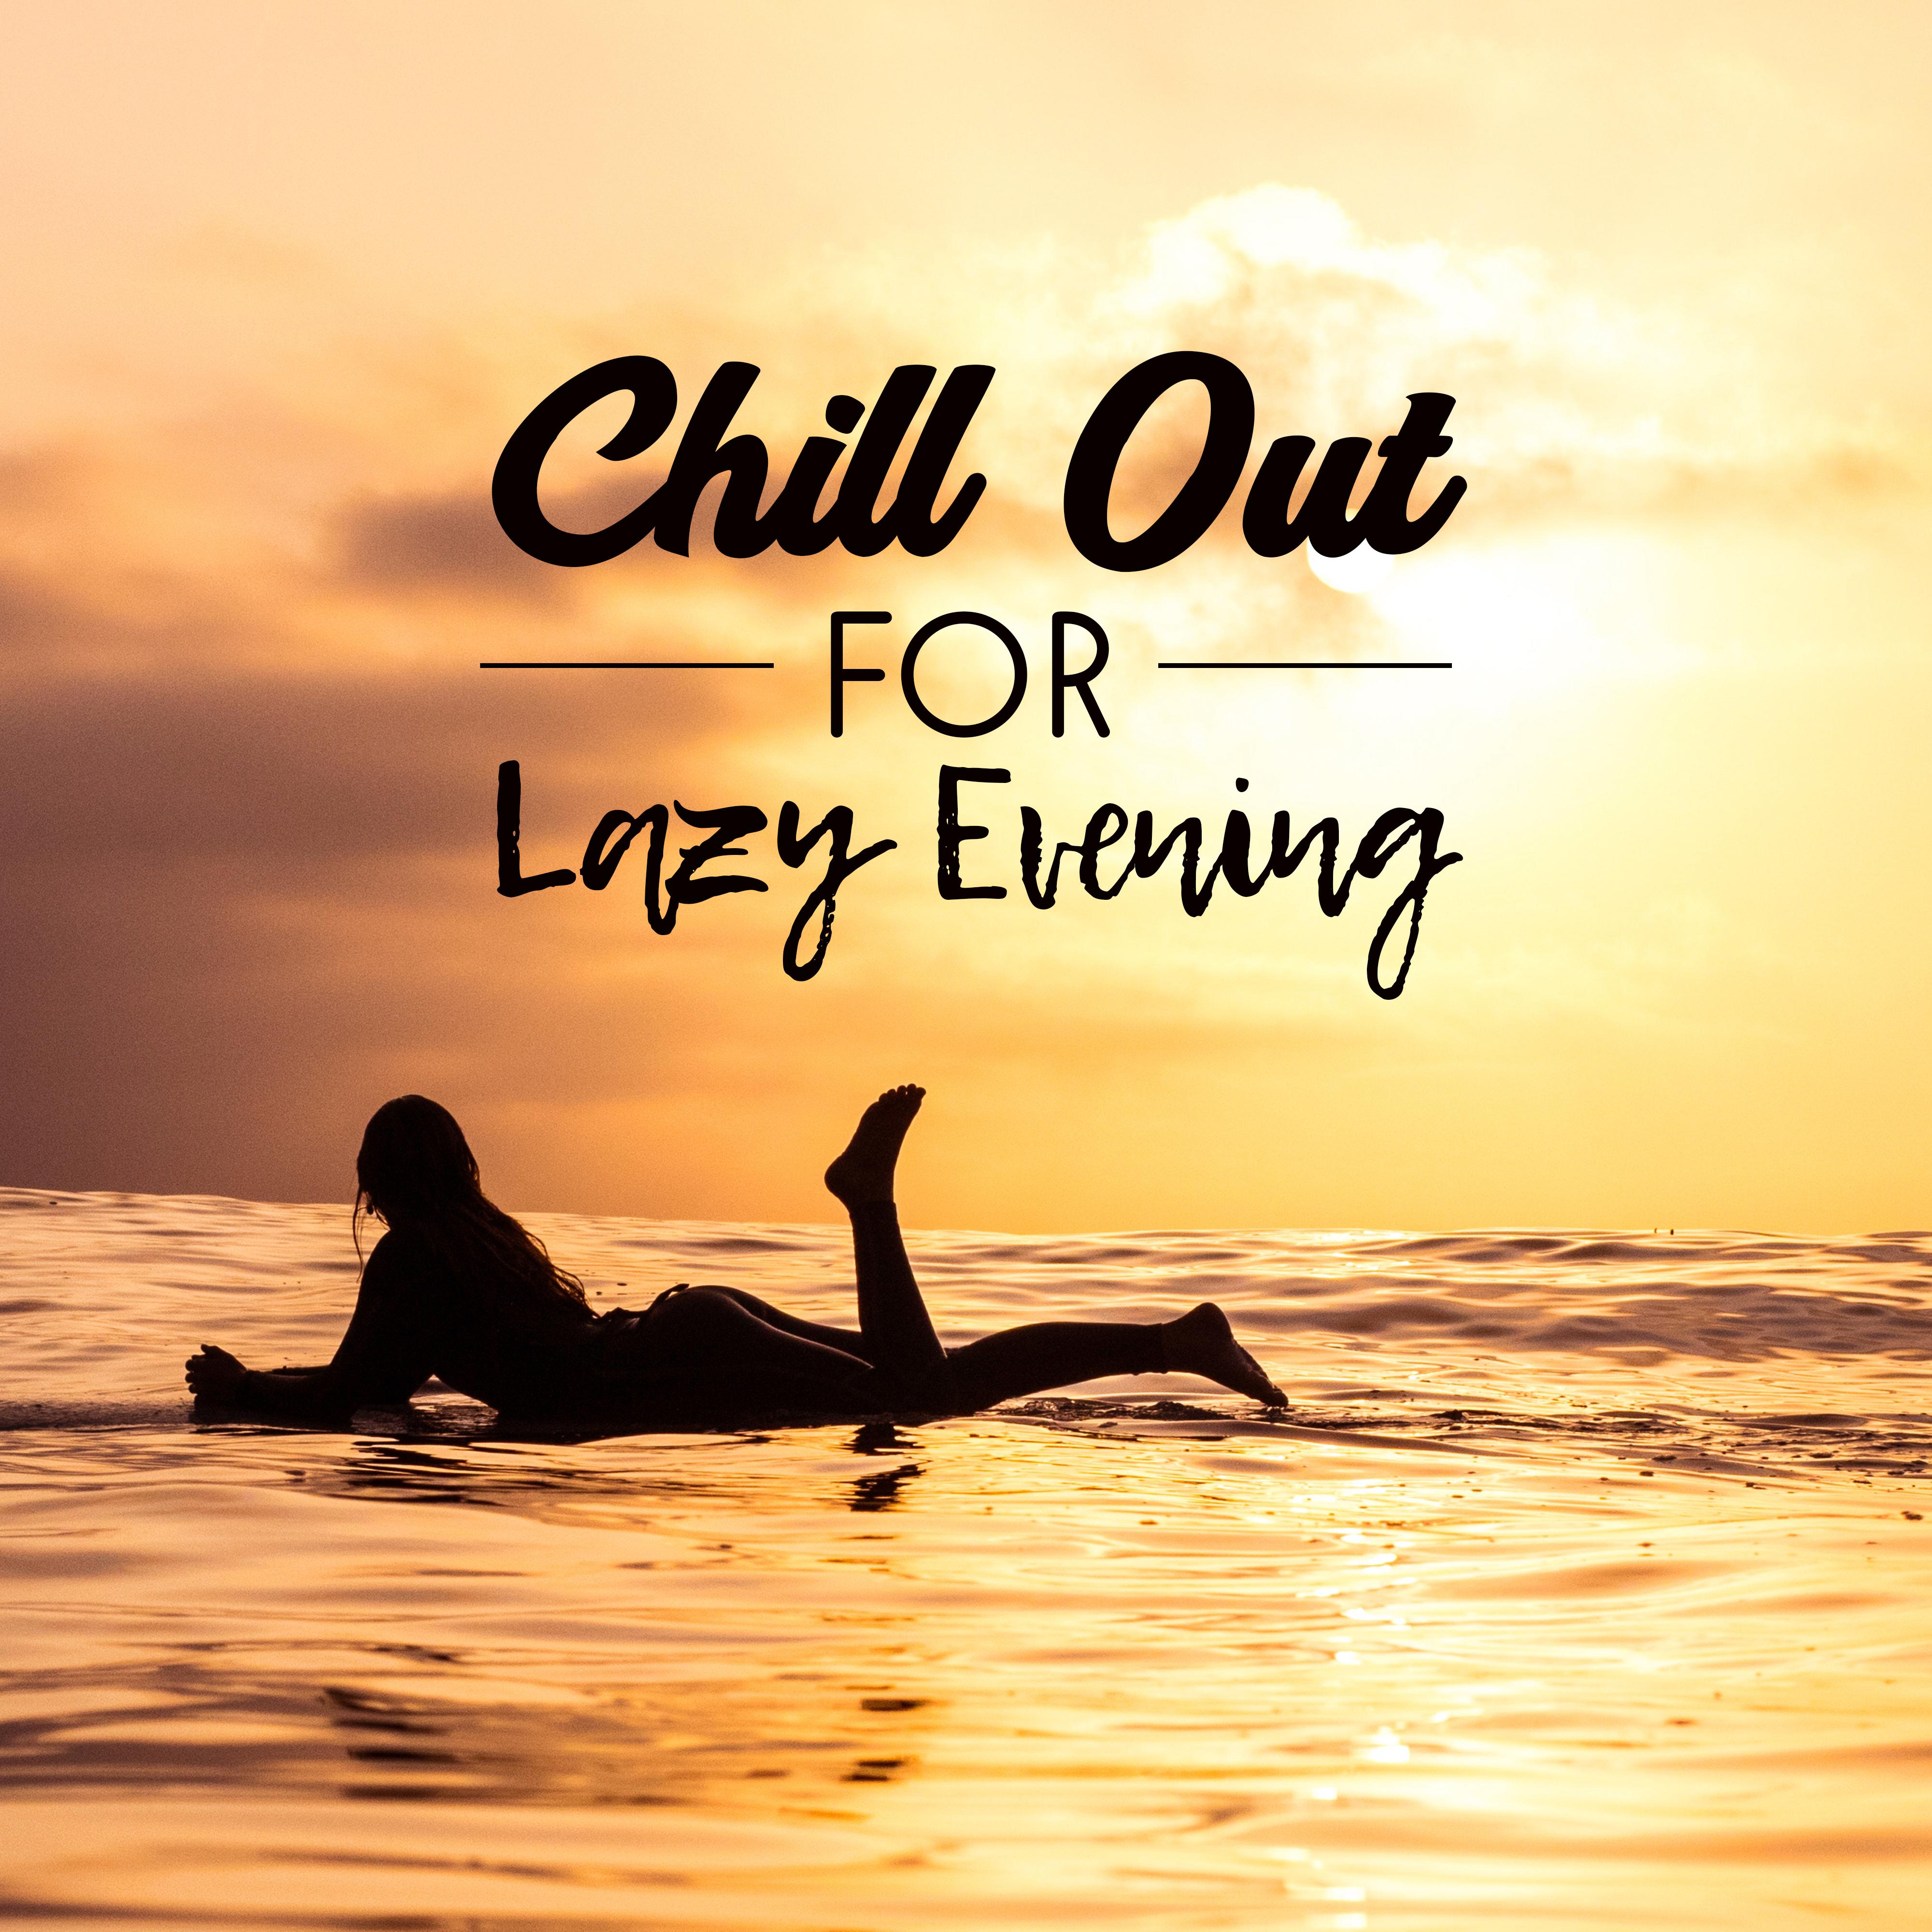 Chill Out for Lazy Evening  Calm Down  Relax, Chill Out Beats, Soft Music, Easy Listening